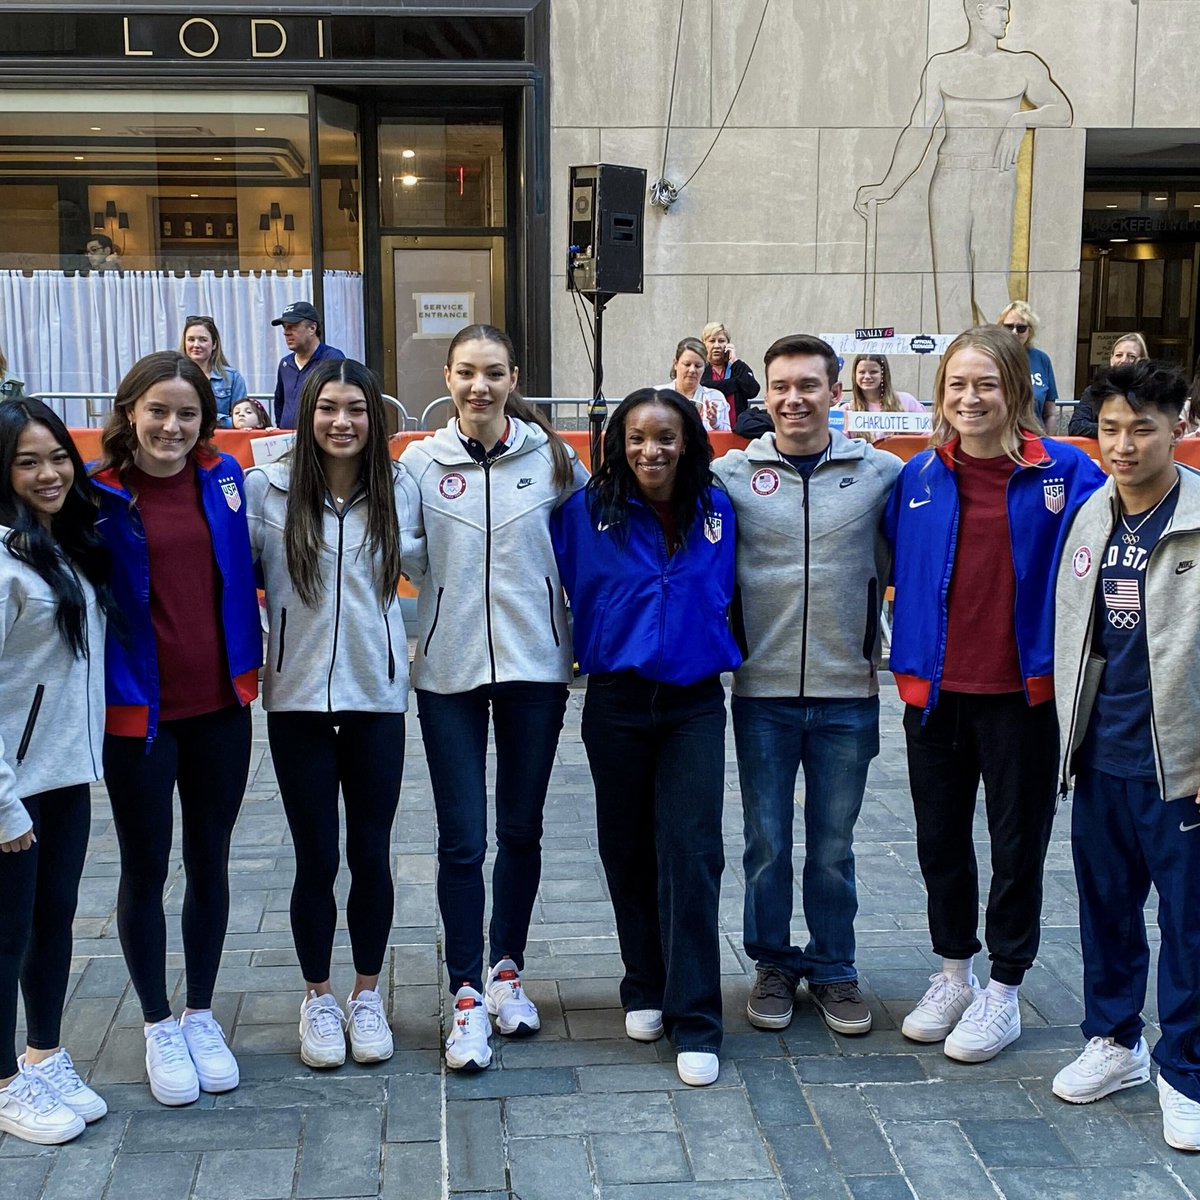 Live from New York, it's Monday morning! It's a Countdown to Paris with the @TODAYshow and @USAGym 🇺🇸